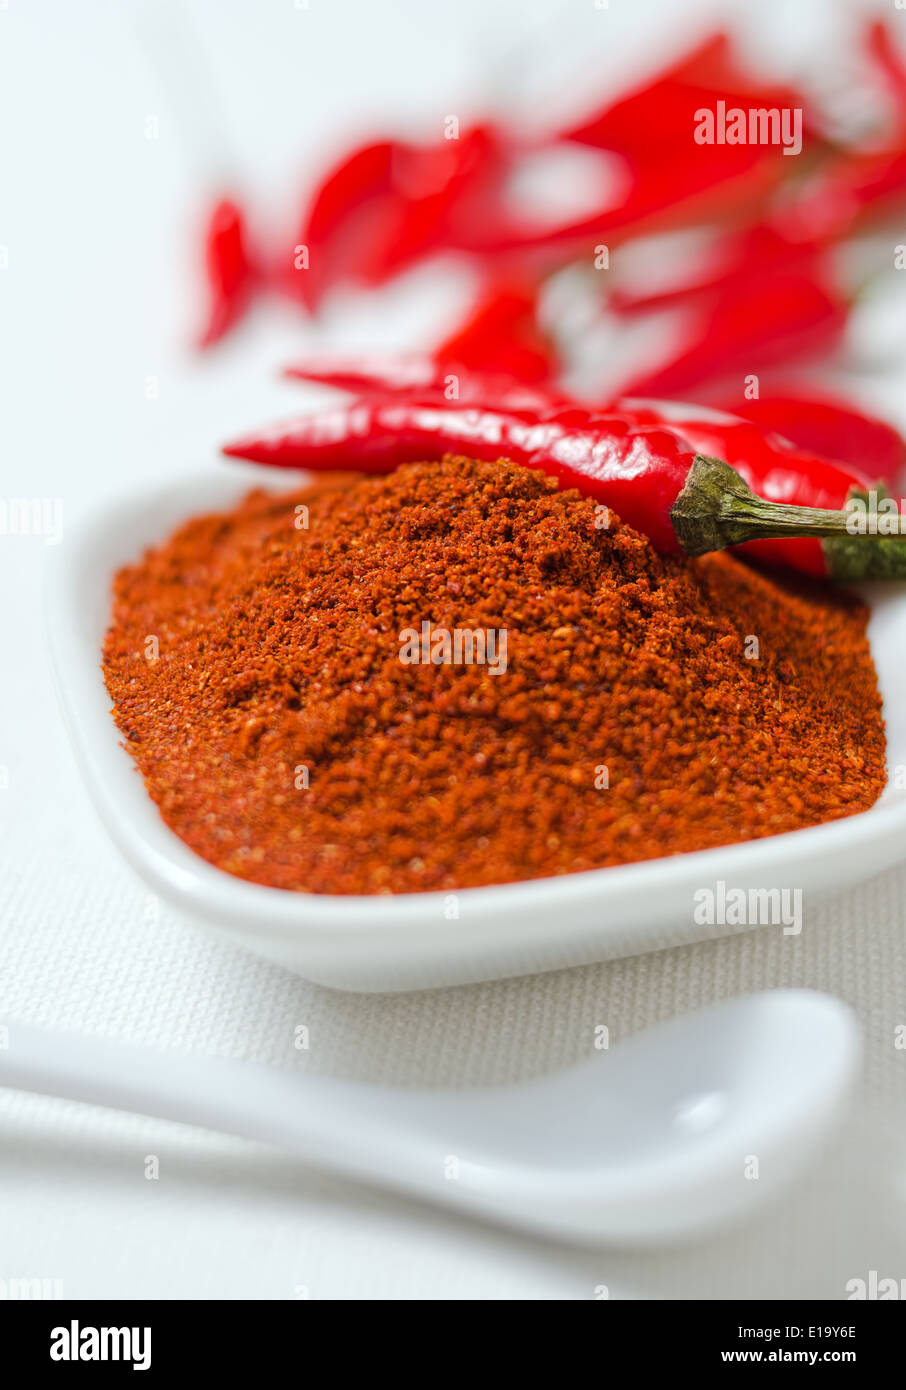 Ground cayenne pepper with whole peppers against a white canvas background. Stock Photo